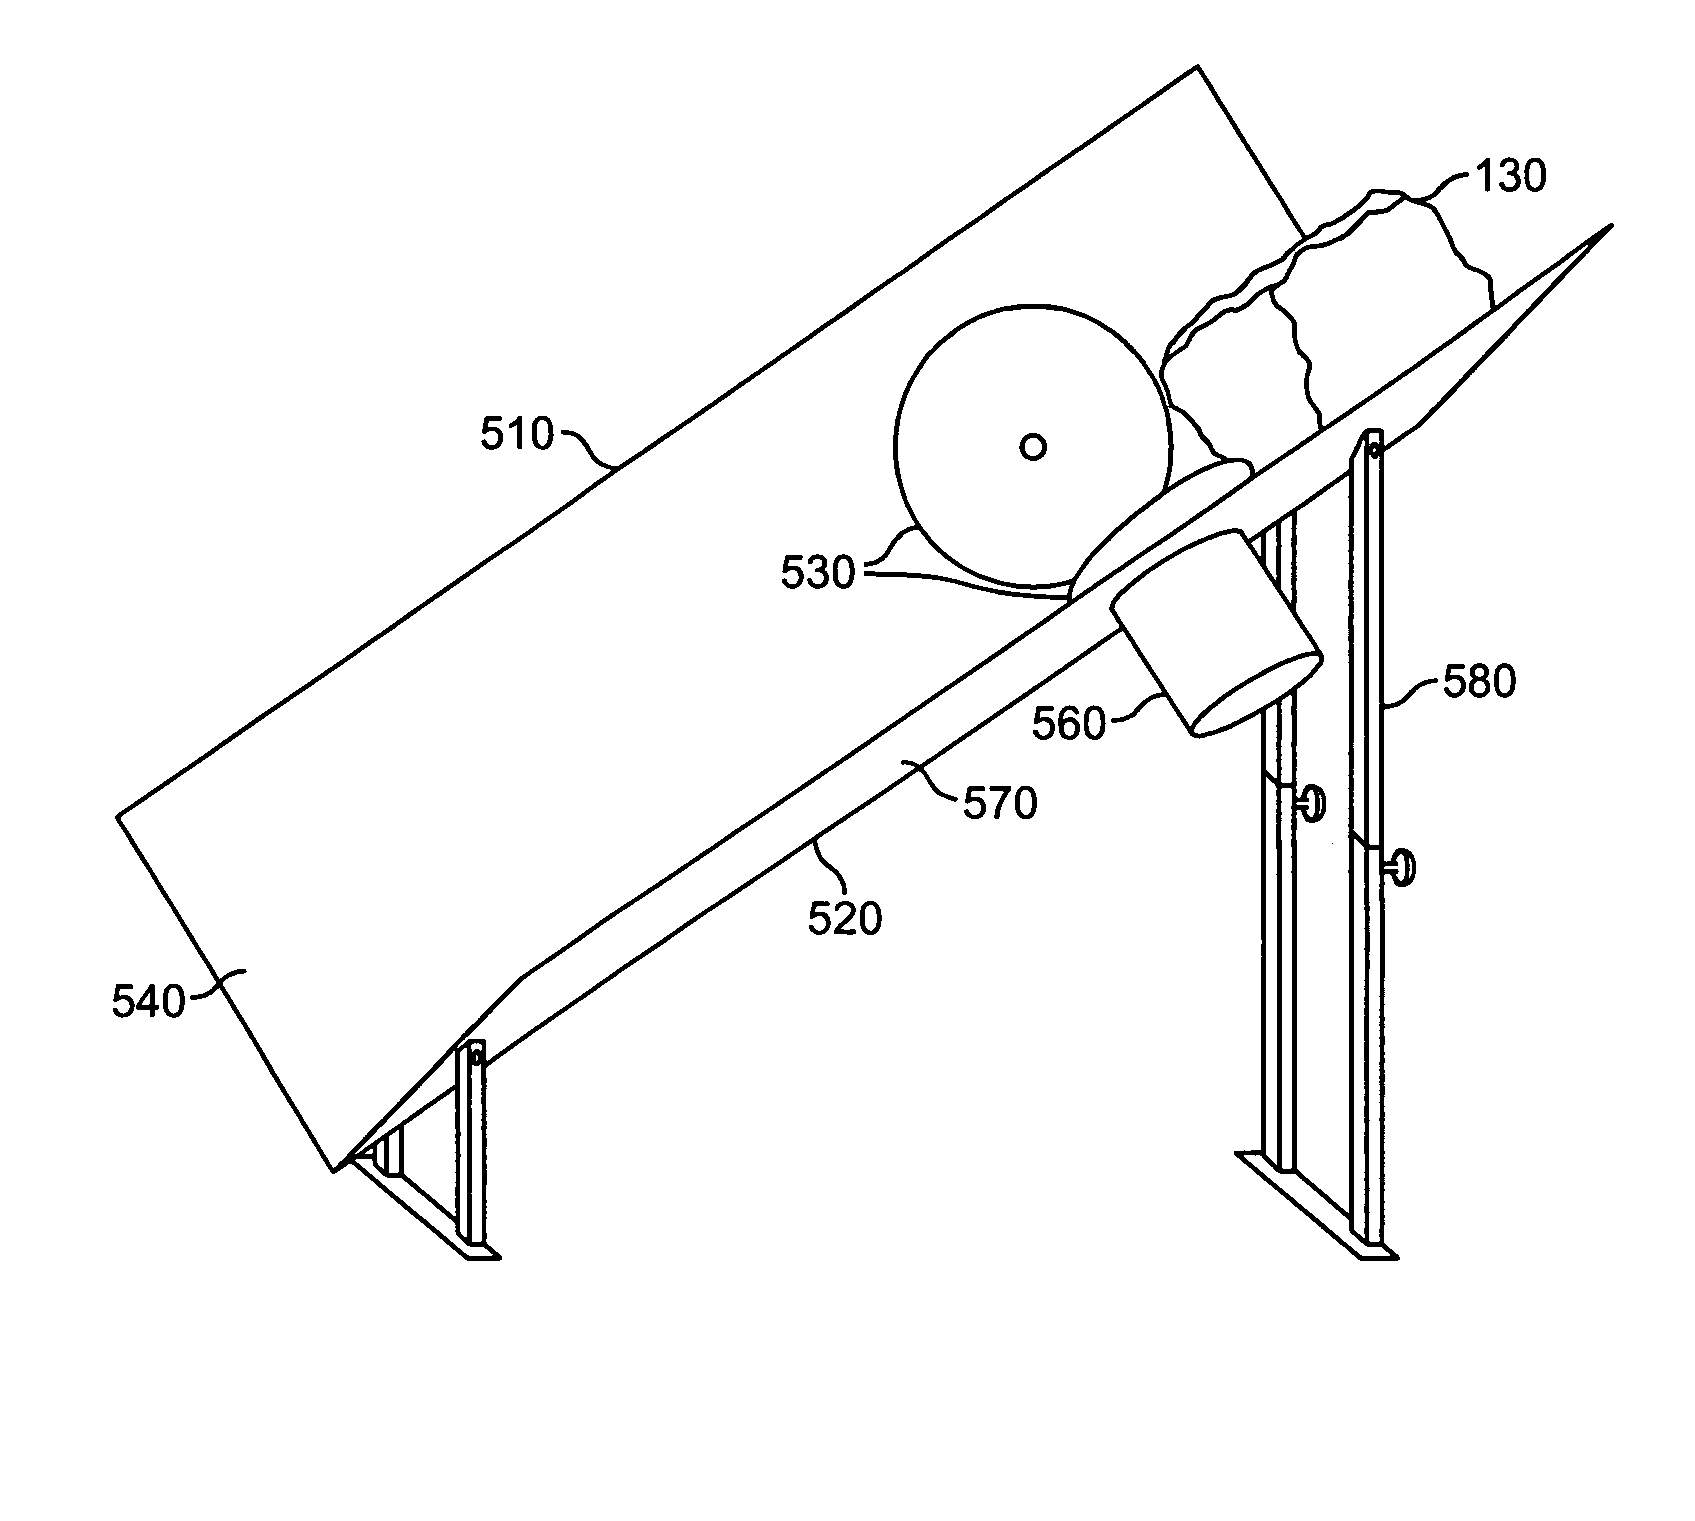 Method for manufacturing non-seamed stone corners for veneer stone surfaces